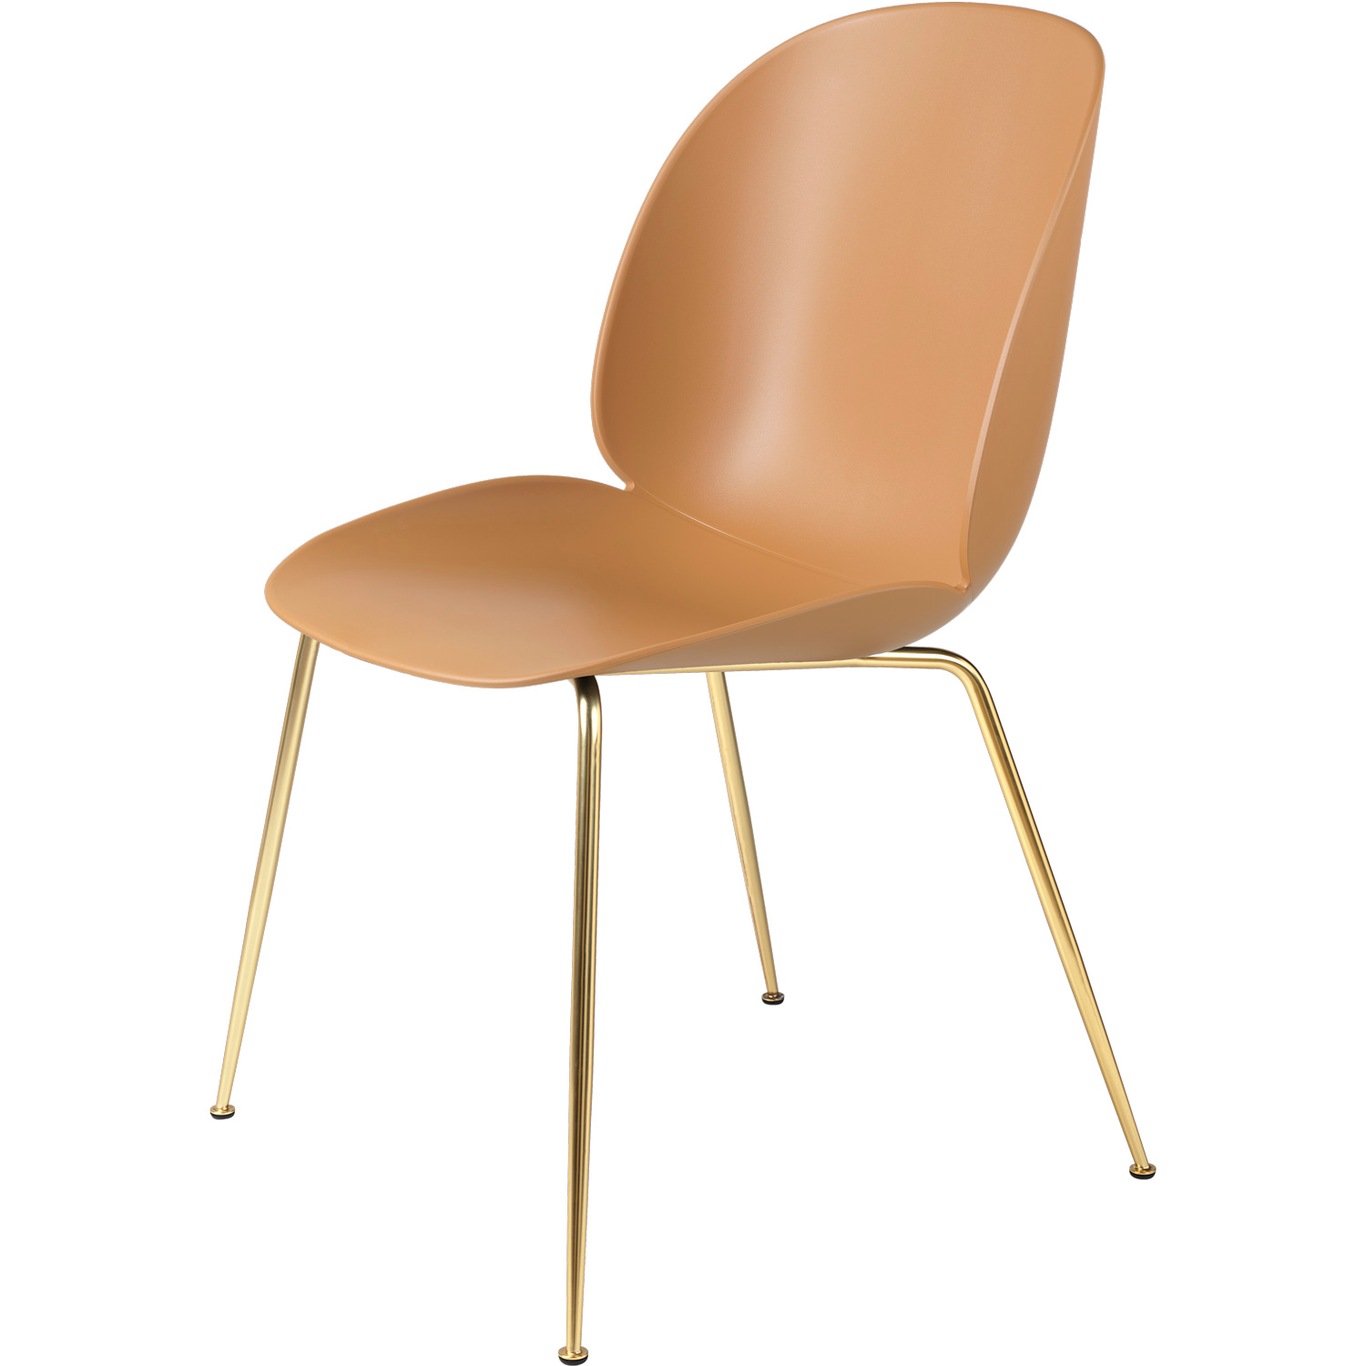 Beetle Dining Chair Un-upholstered, Conic Base Brass, Amber Brown